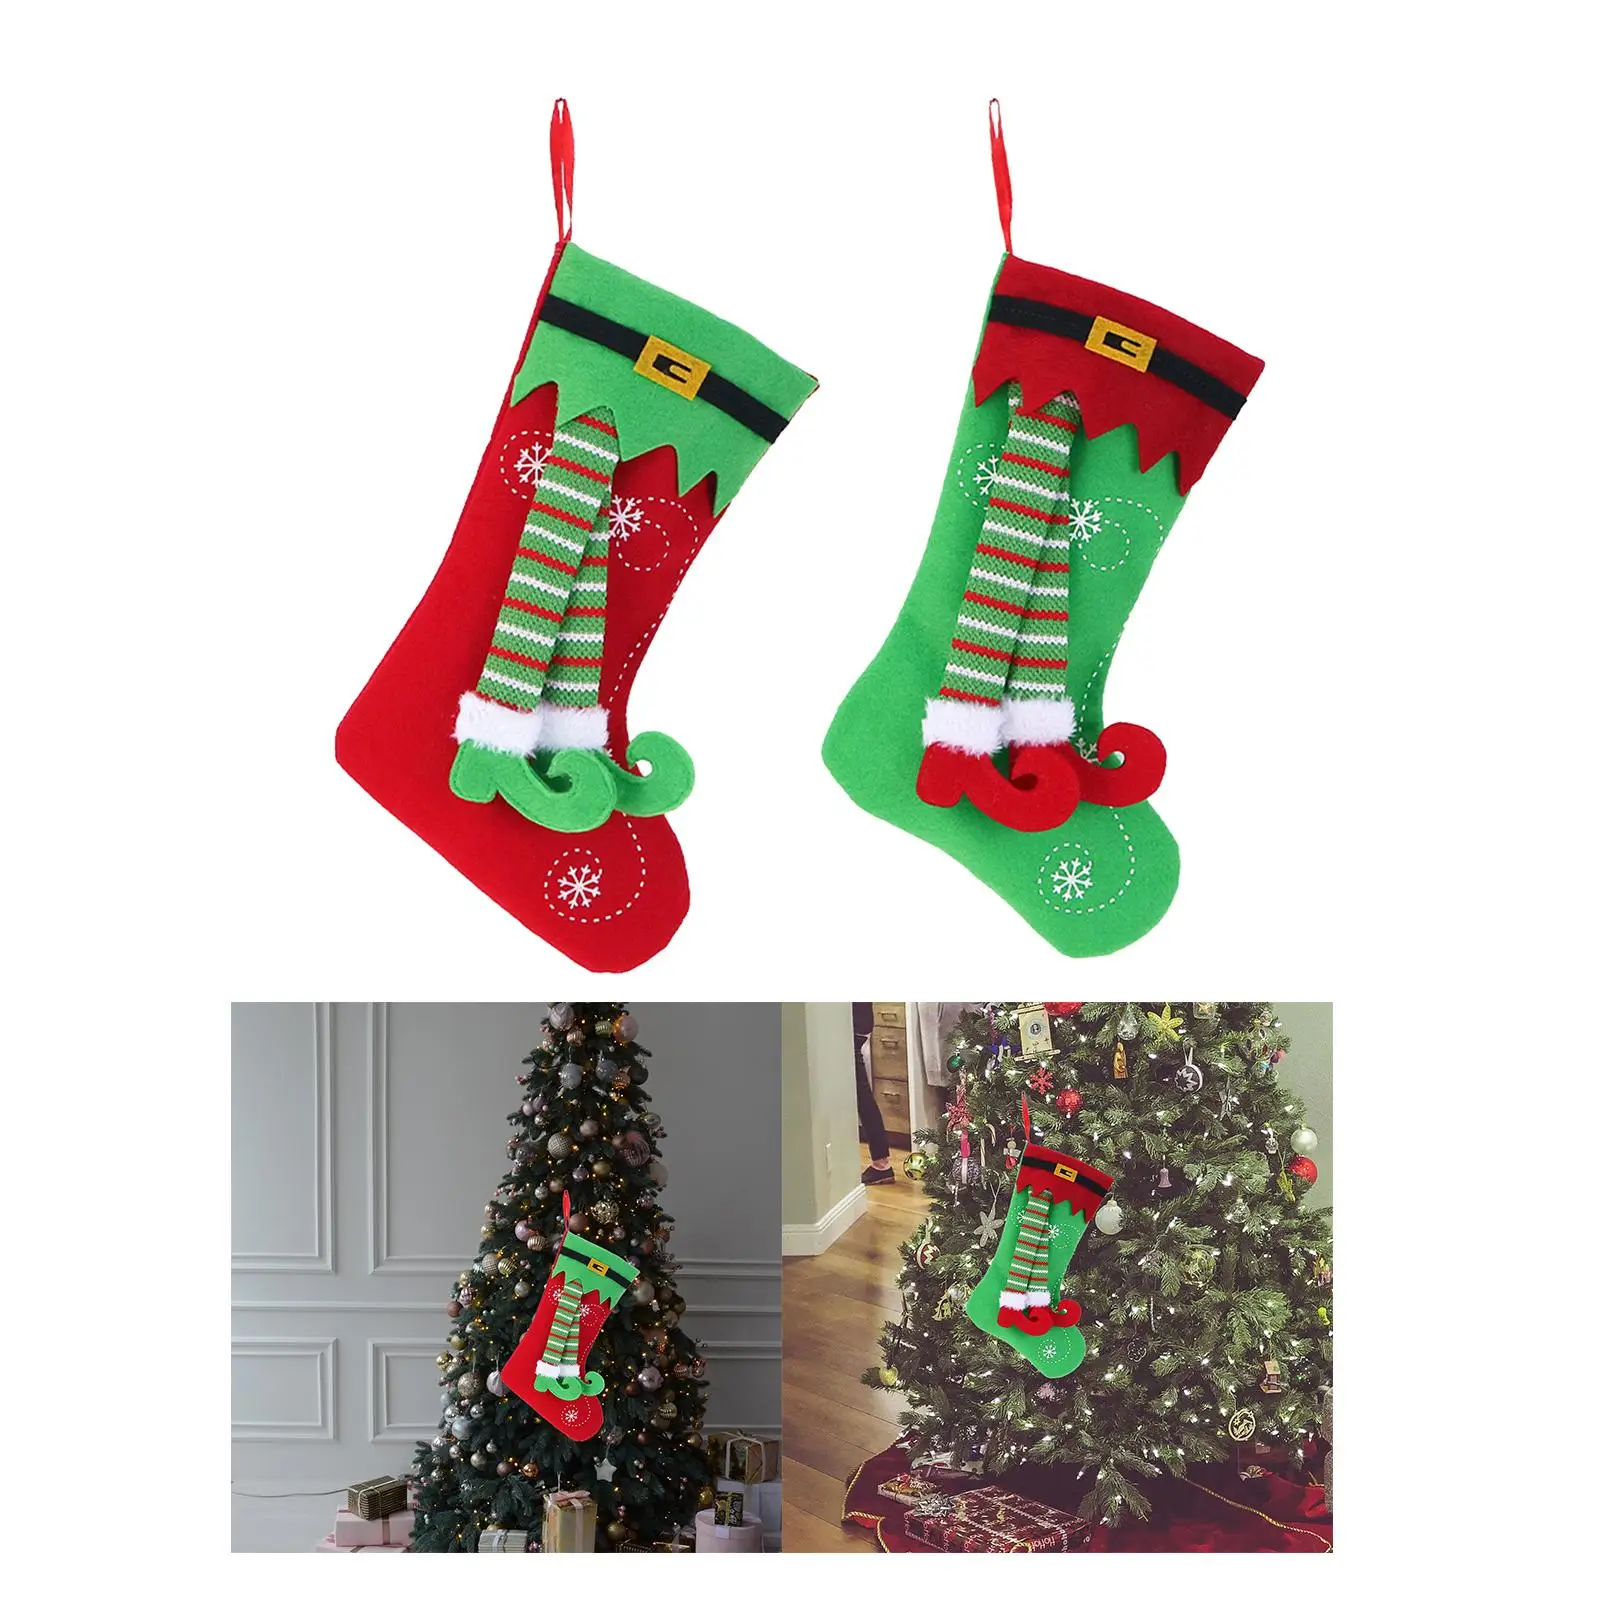 Rustic Christmas Decorative Stocking for Office Holiday Indoor Festival